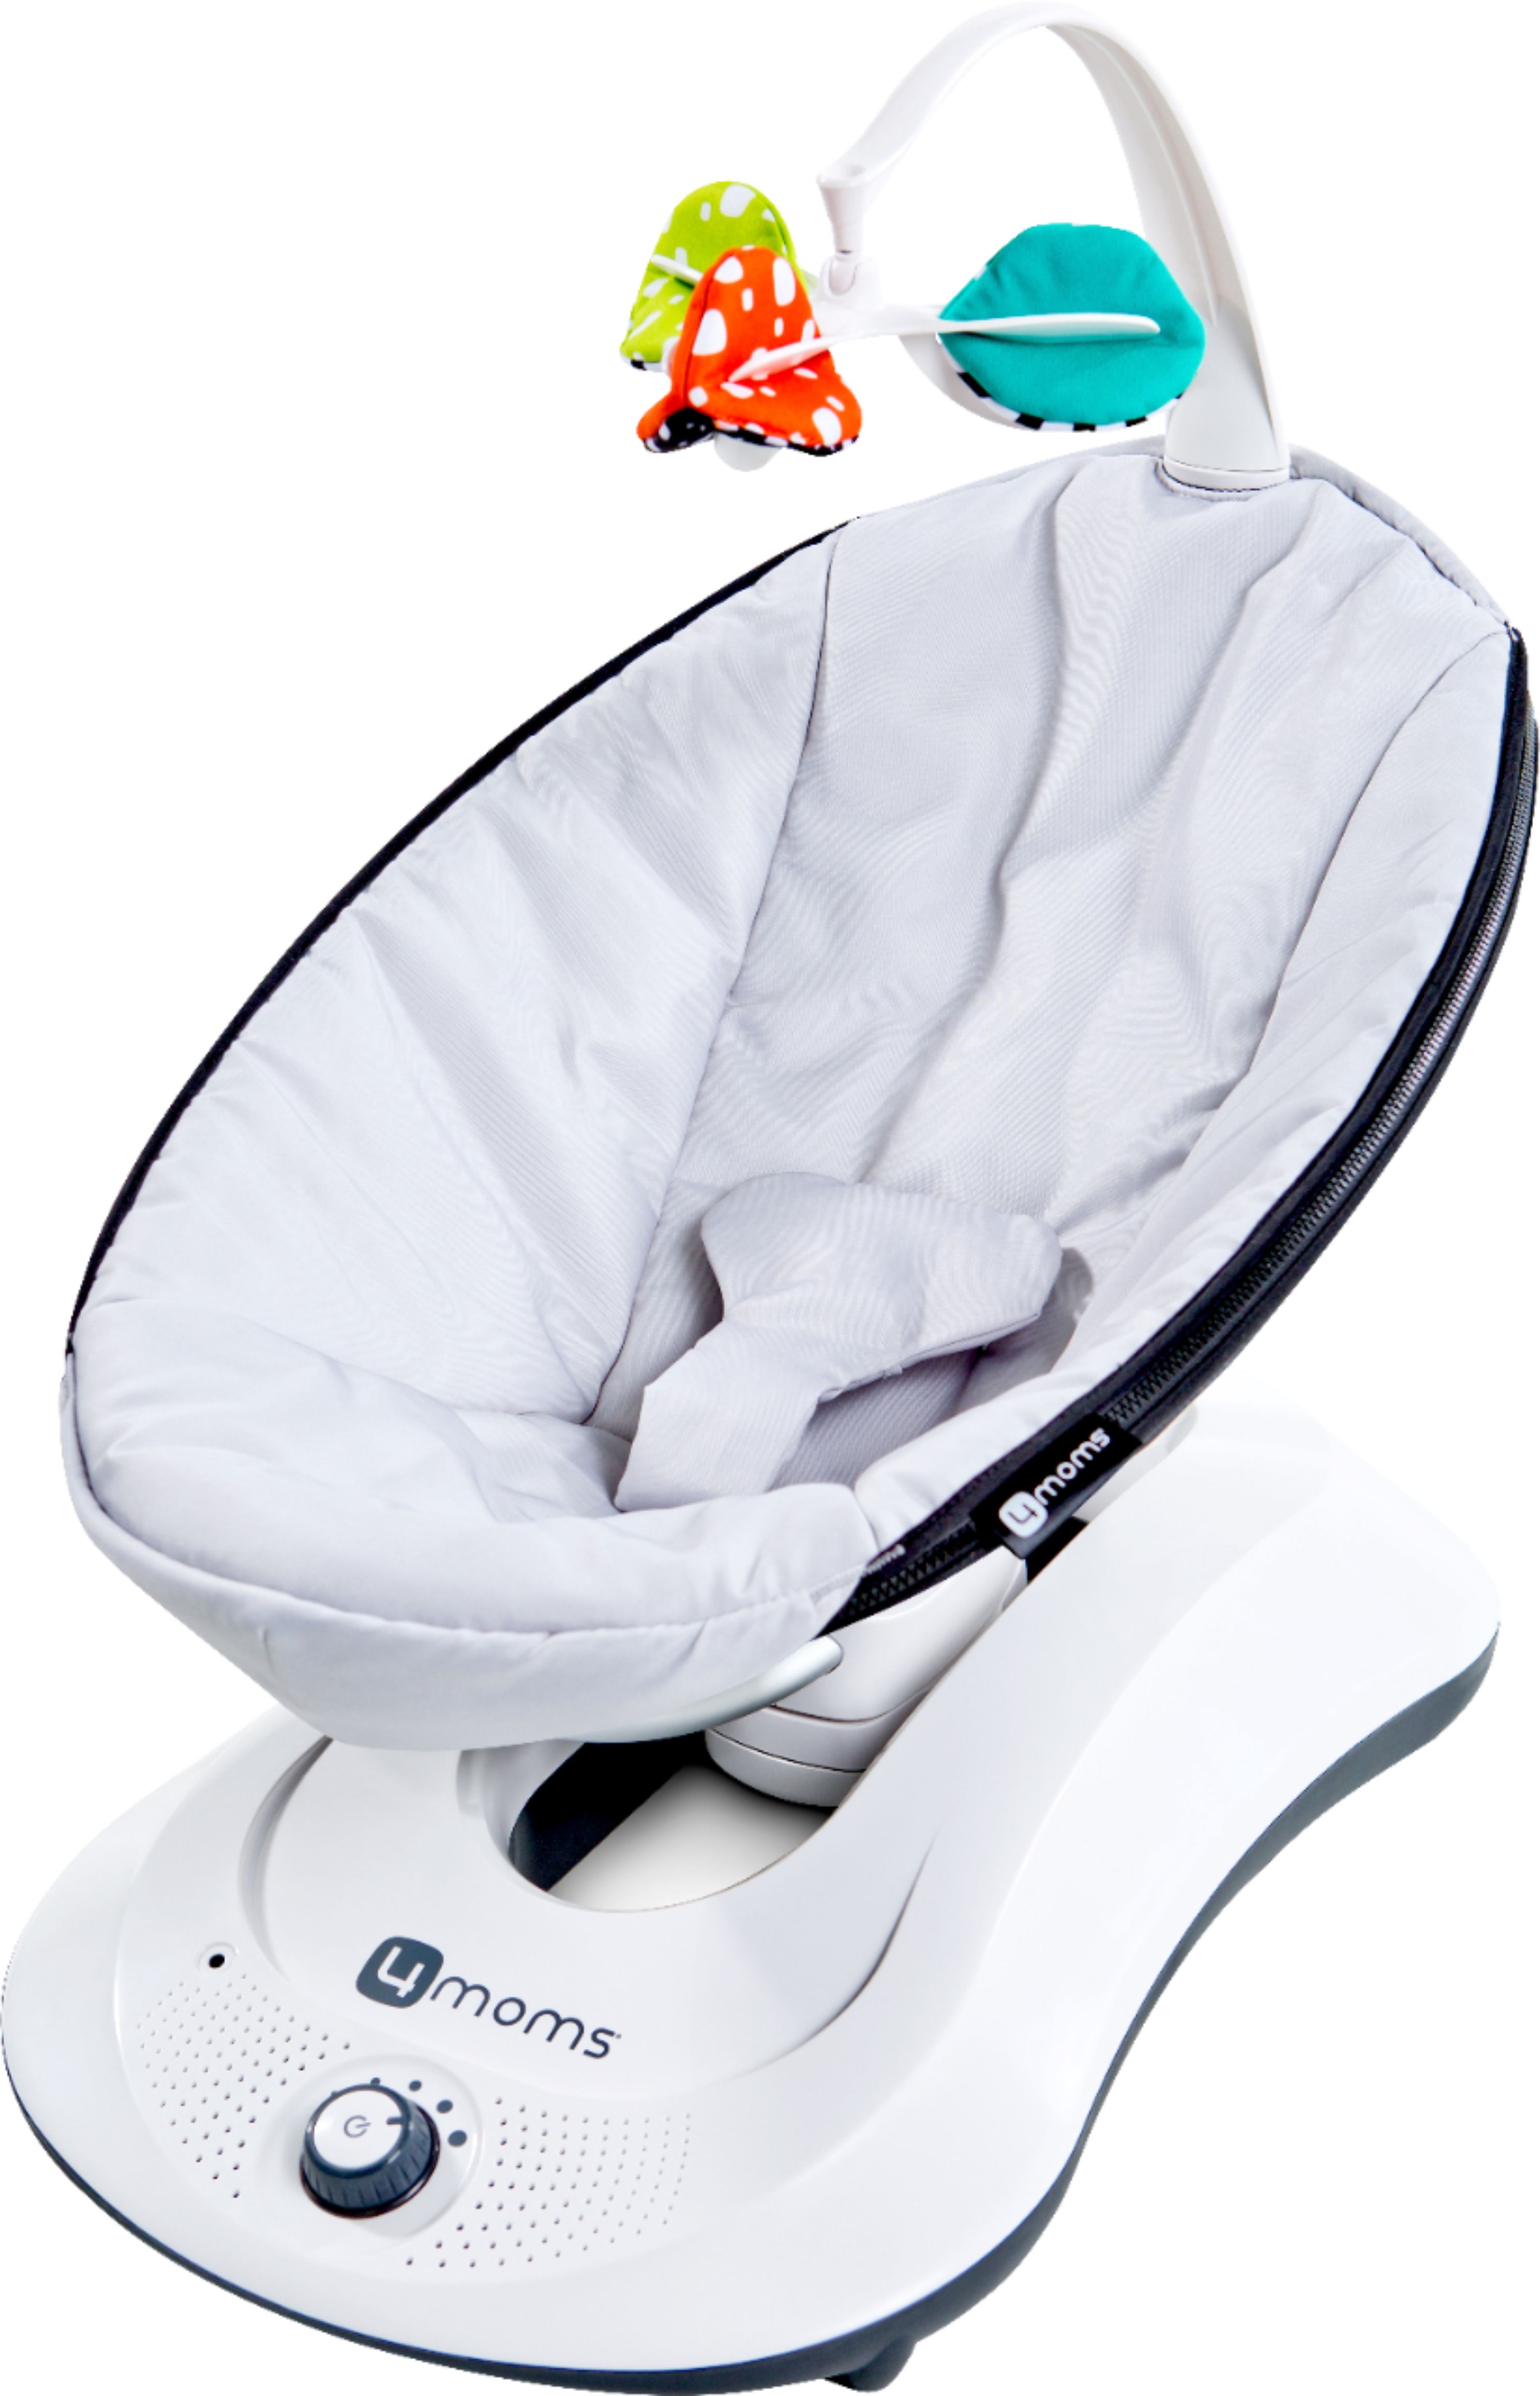 Angle View: Fisher-Price Deluxe Take-along Swing & Seat with 6-Speeds, White